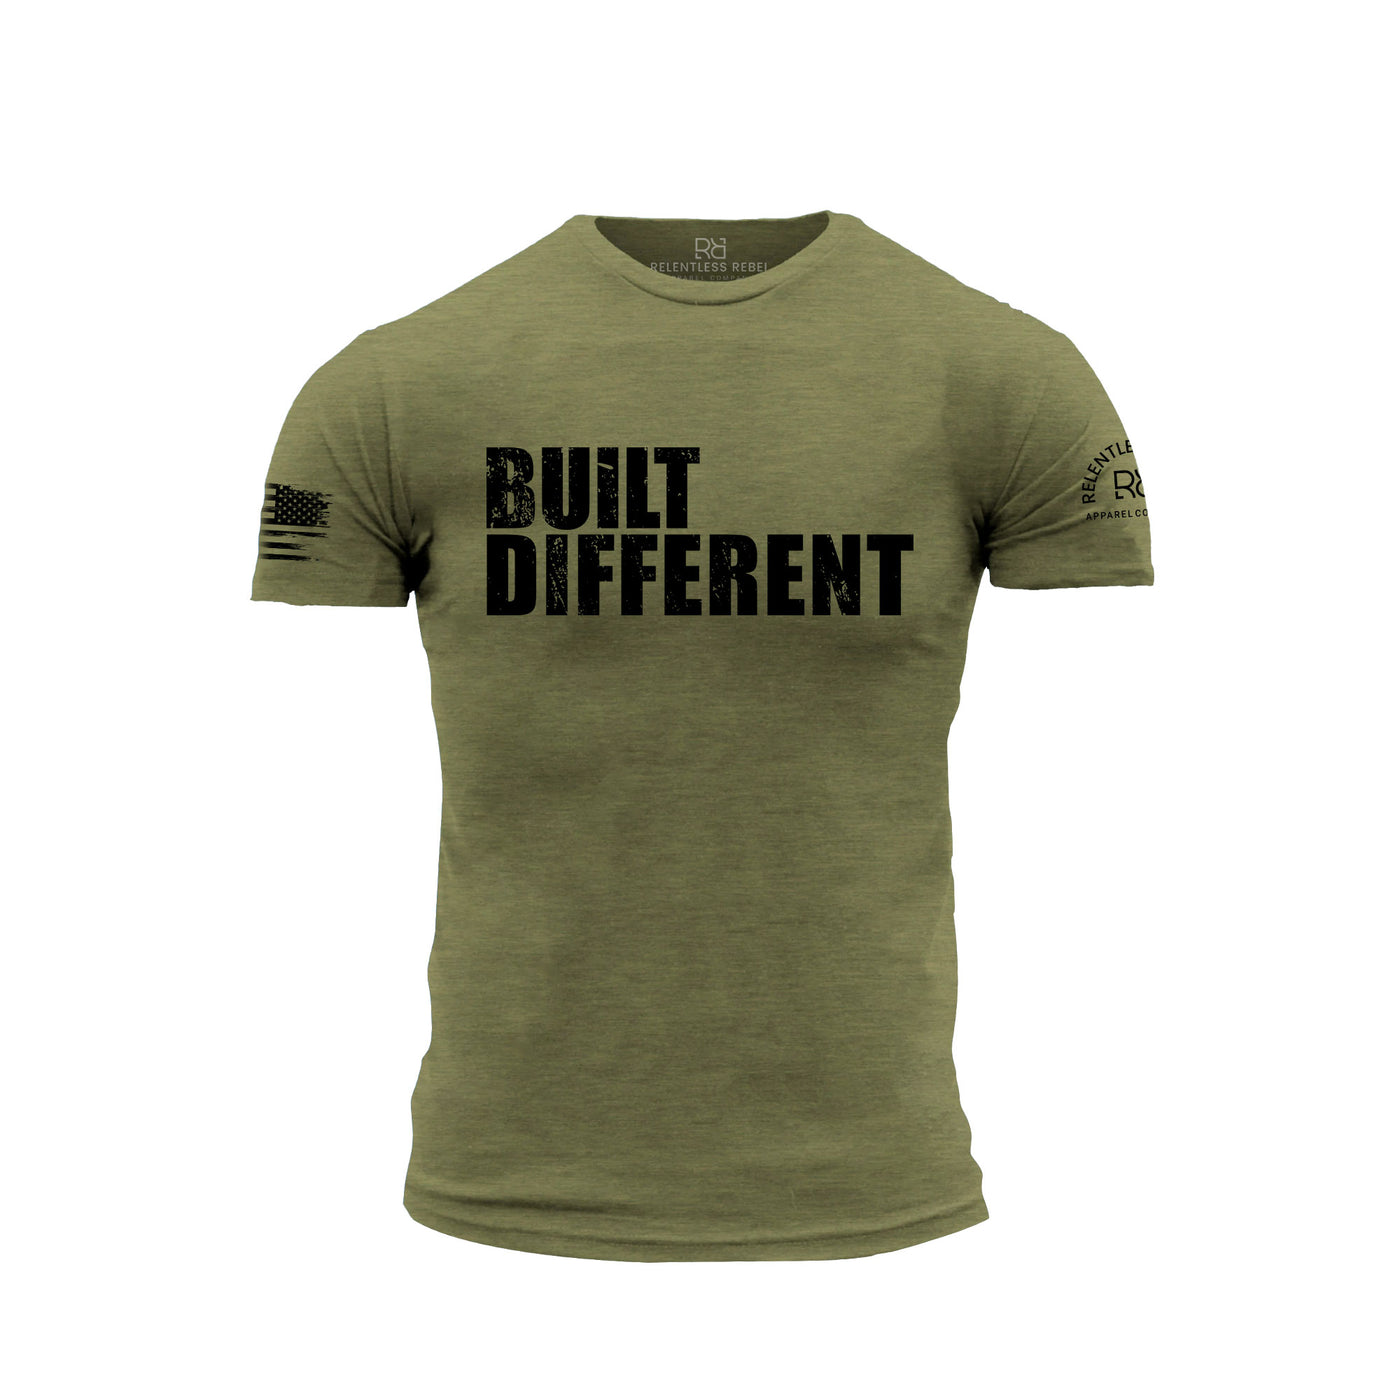 Built Different Military Green front design t-shirt